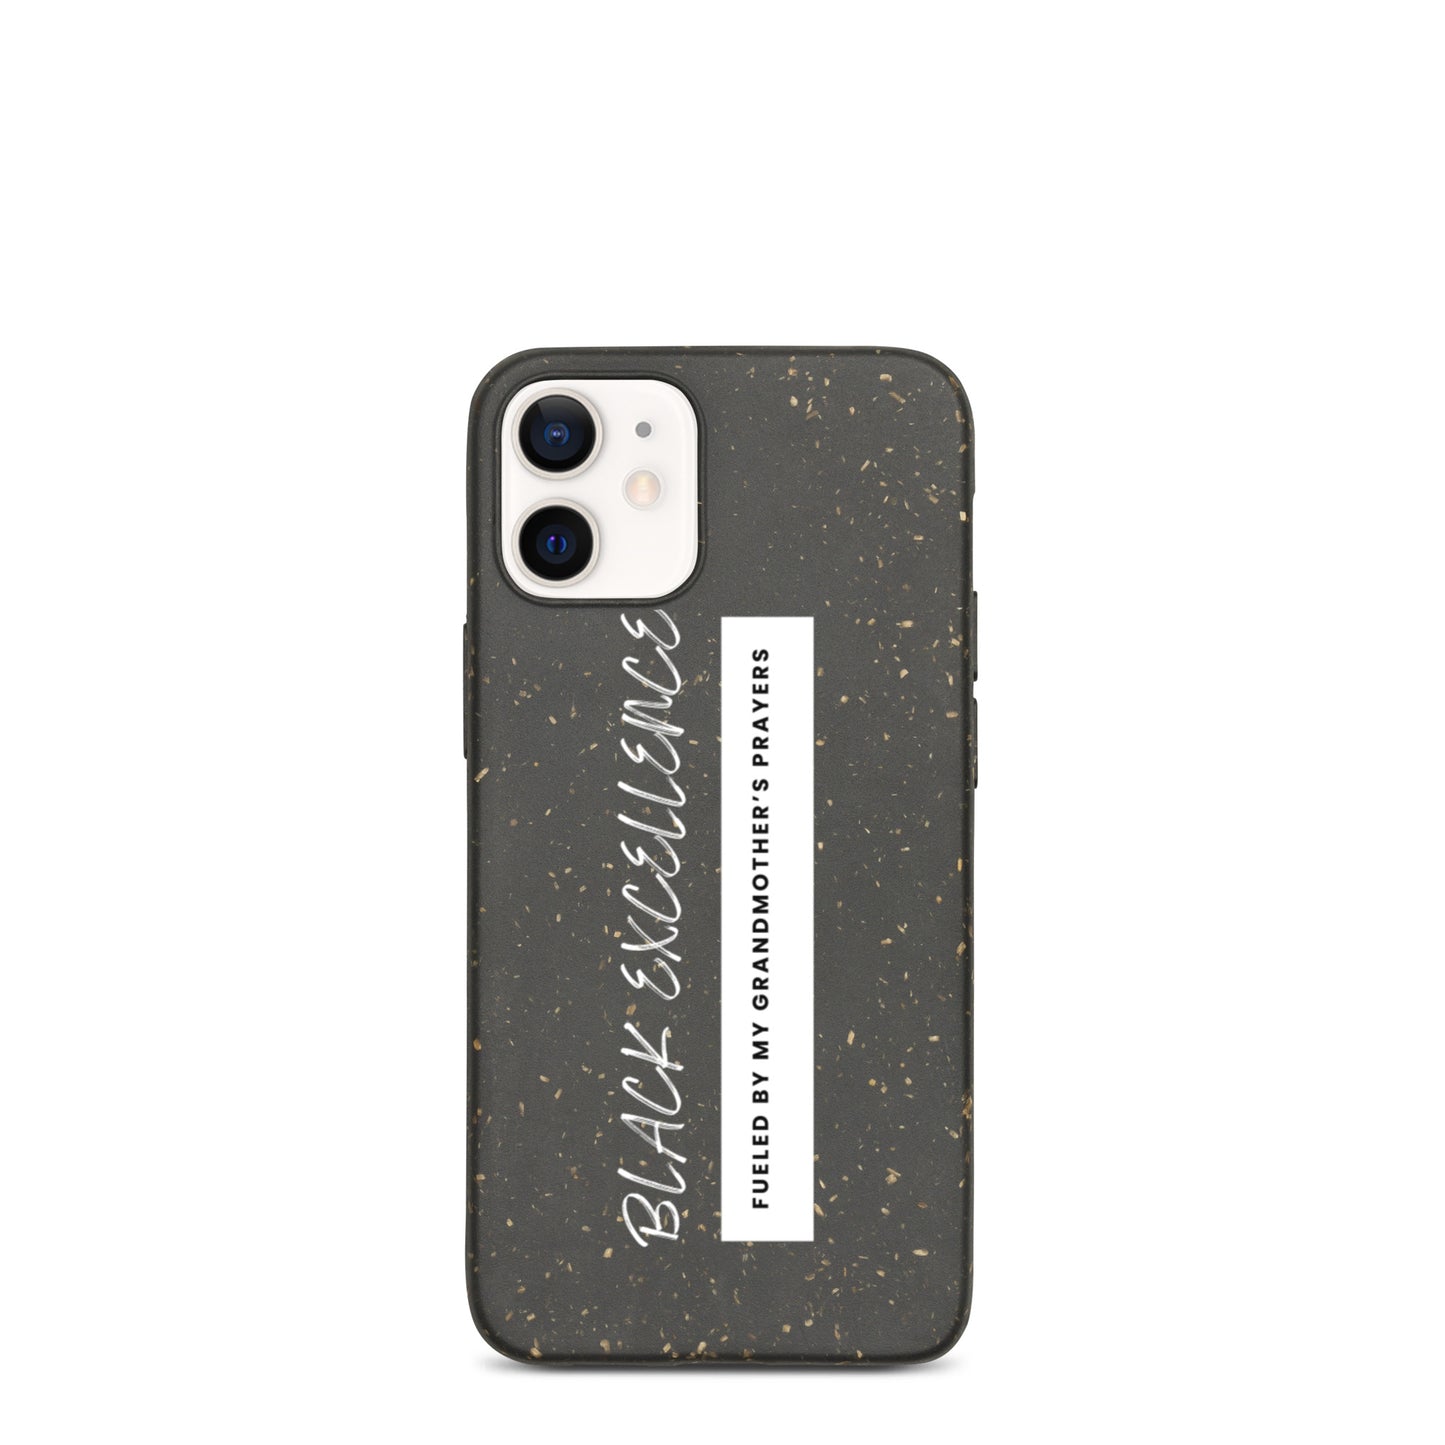 Fueled By My Grandmother's Prayers Speckled iPhone Case